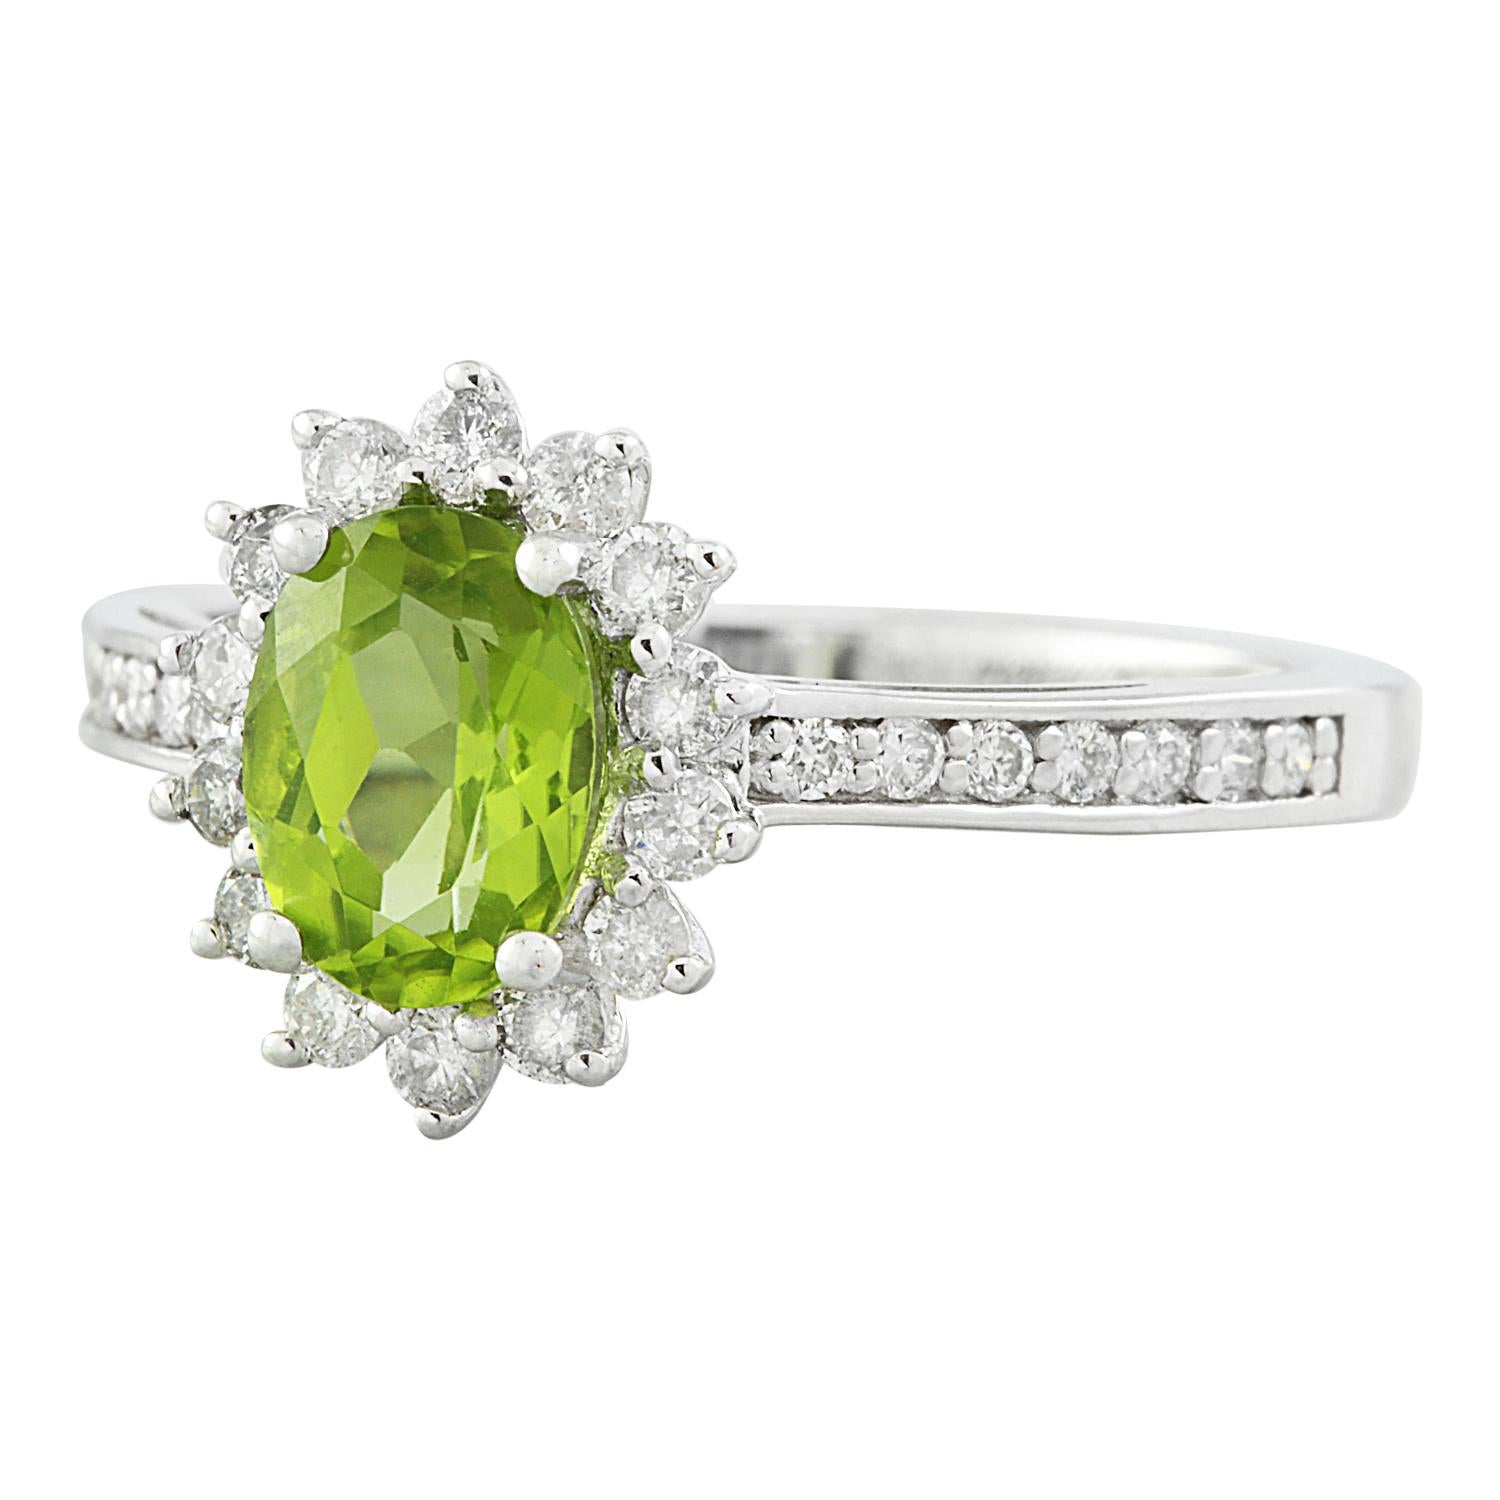 Discover elegance with our 14K Solid White Gold Diamond Ring, featuring a captivating 1.95 Carat Natural Peridot. This exquisite piece is stamped with 14K authenticity, guaranteeing its quality craftsmanship. With a total weight of 2.8 grams, this